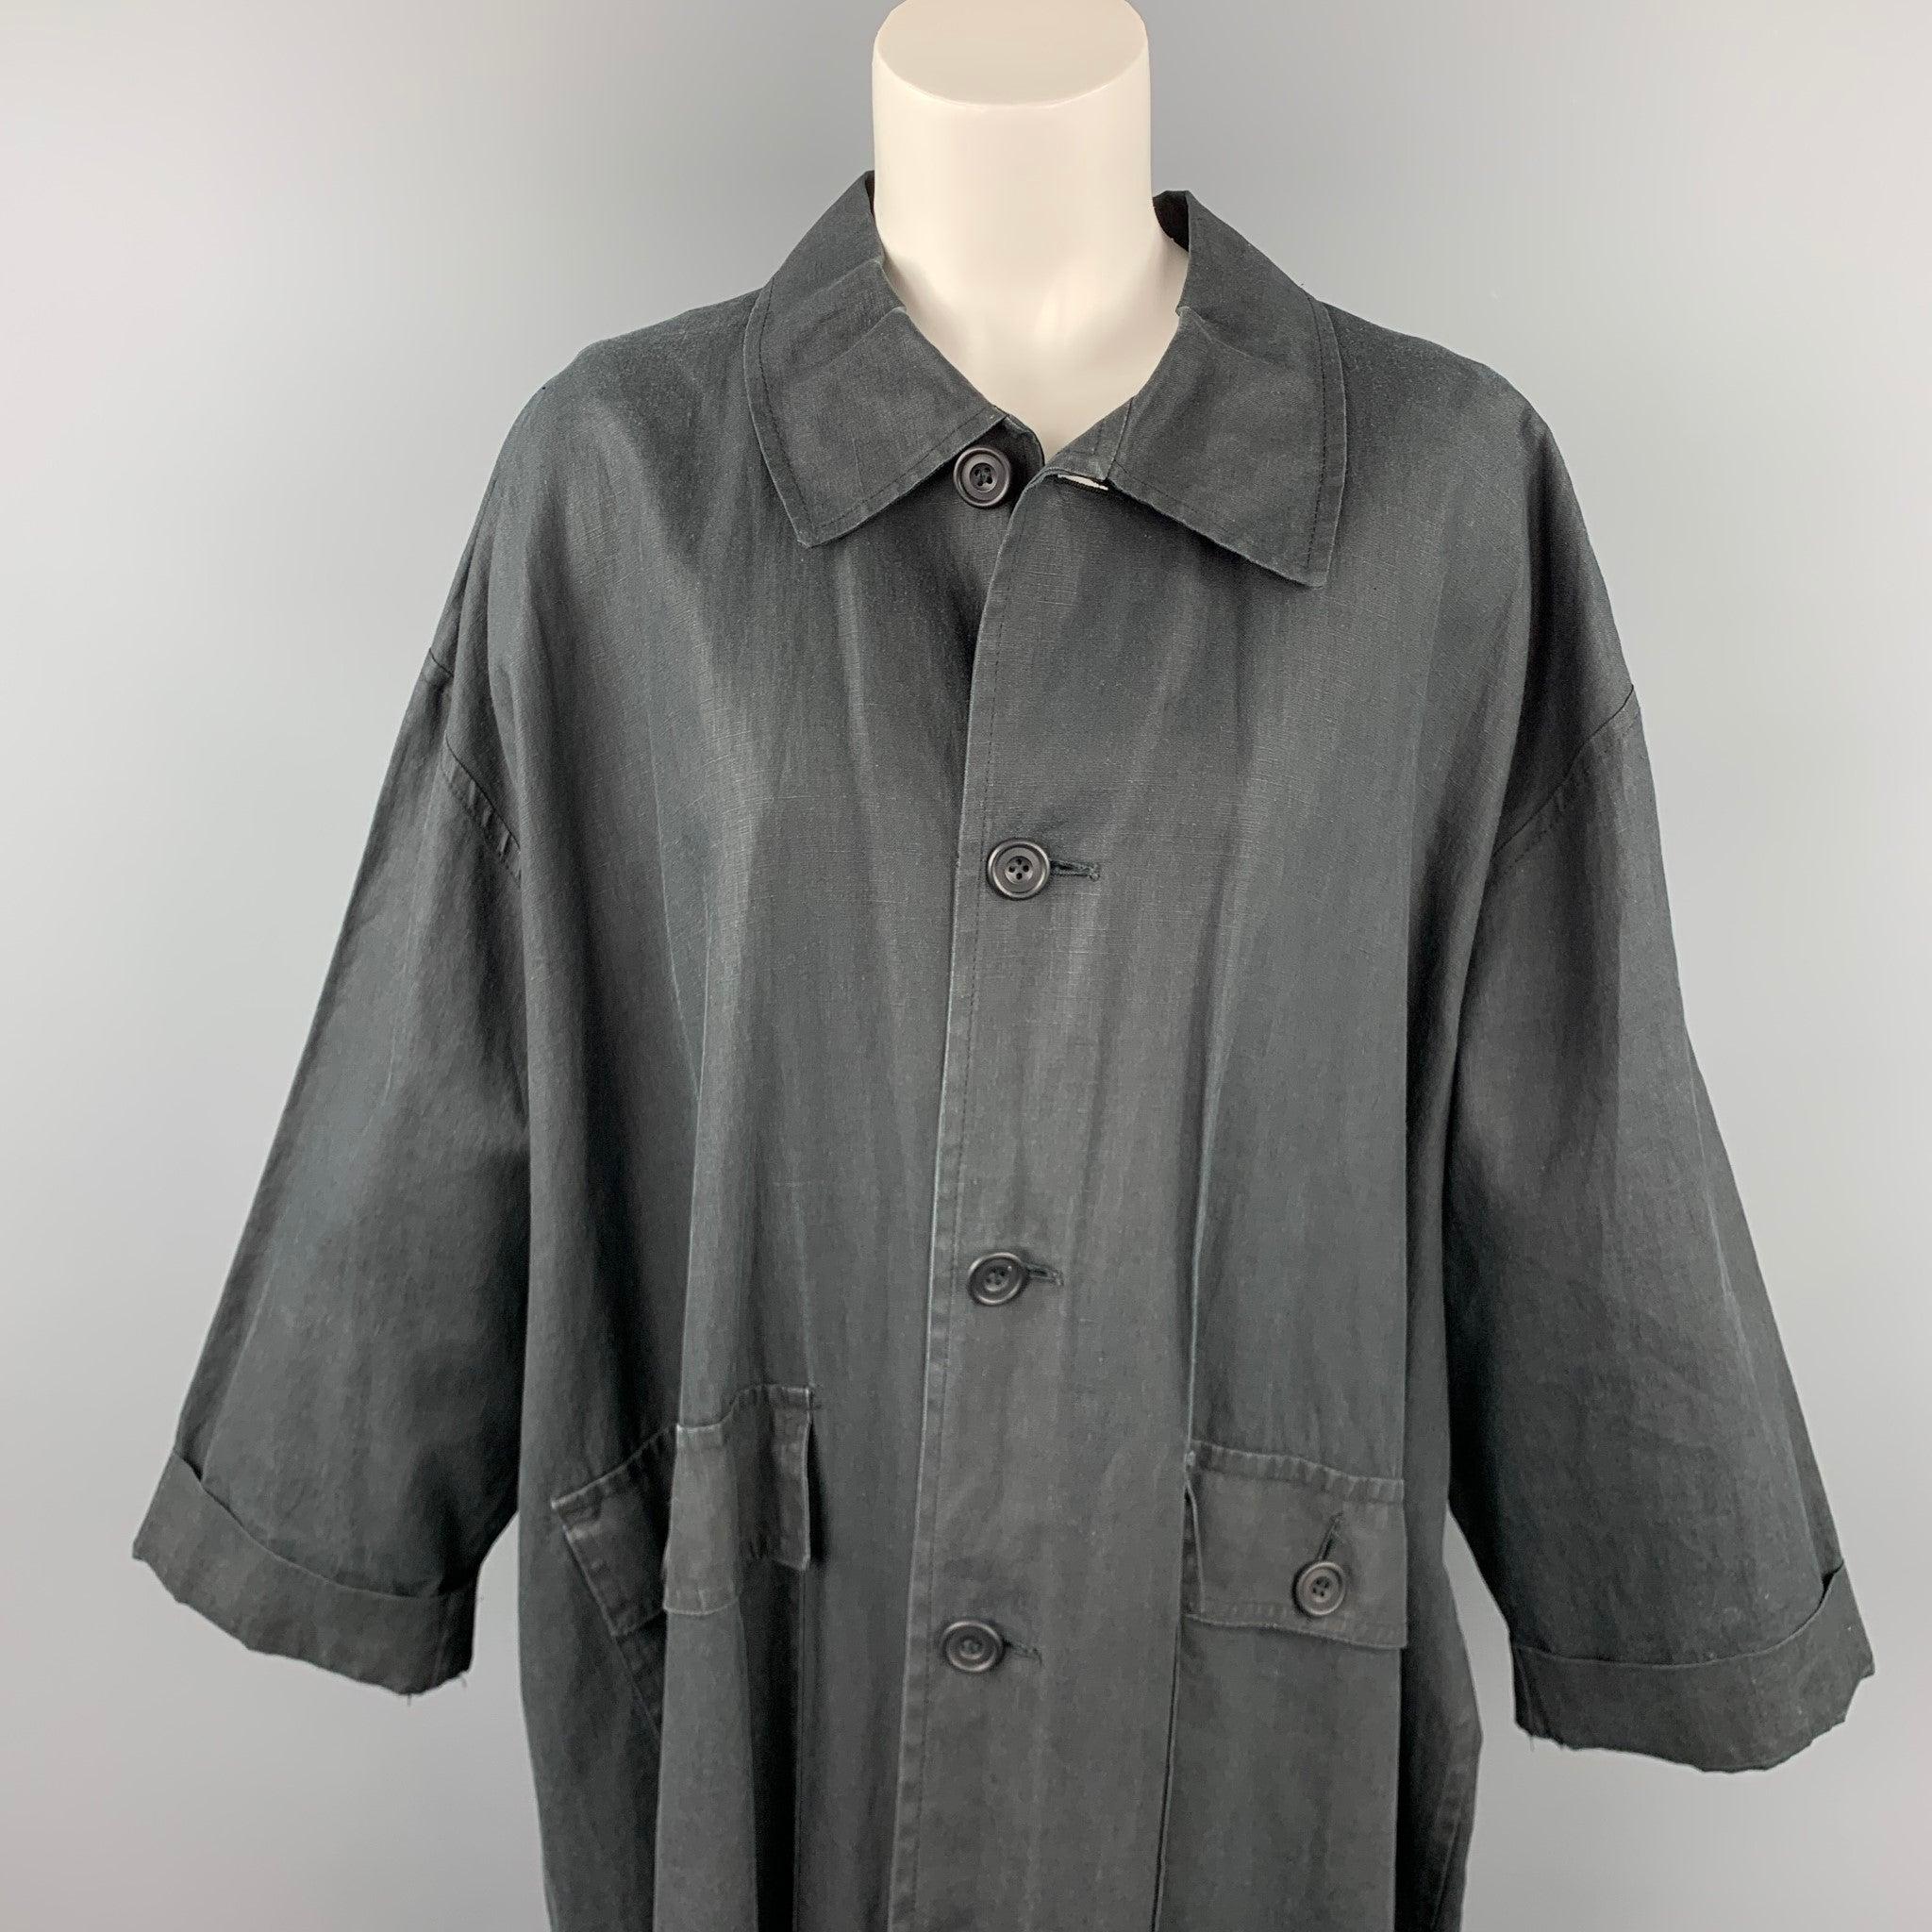 ESKANDAR overcoat comes in a charcoal linen featuring drop slouch shoulders, patch pockets, spread collar, duster panel, and a buttoned closure. Made in England.
Excellent Pre-Owned Condition 
 

Marked:  0 

Measurements: 
 
Shoulder: 24 inches